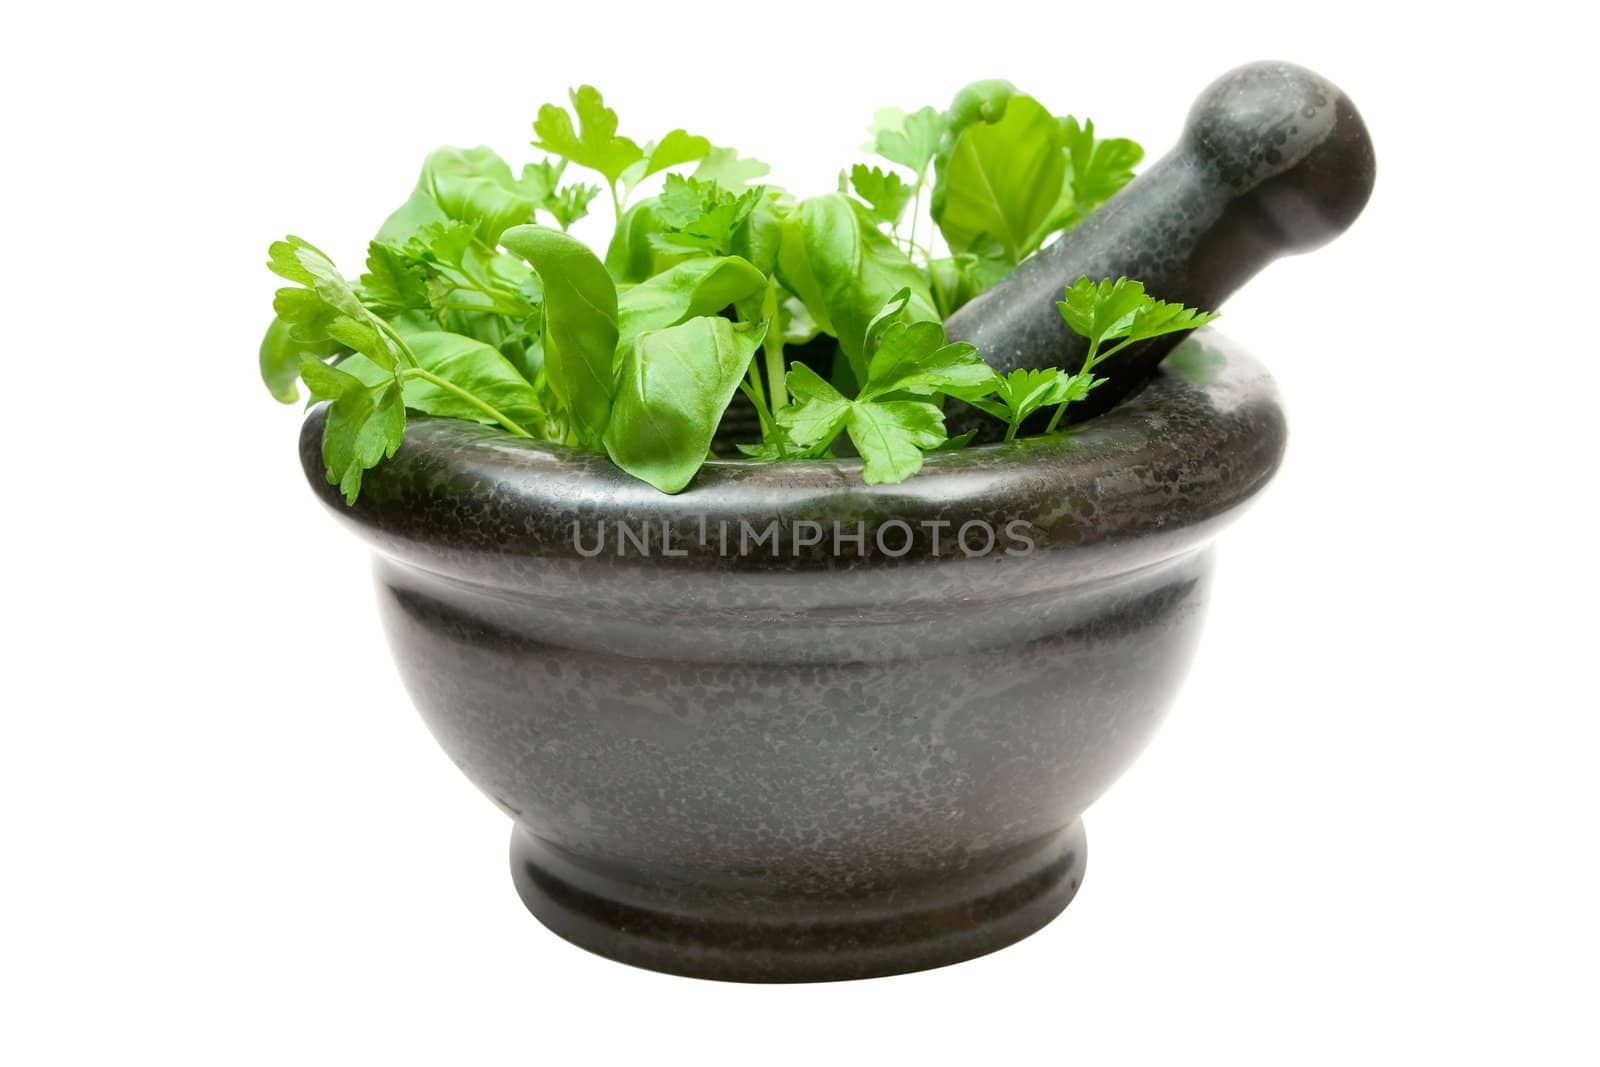 Basil and mint in a stone mortar. Isolated on a white background.